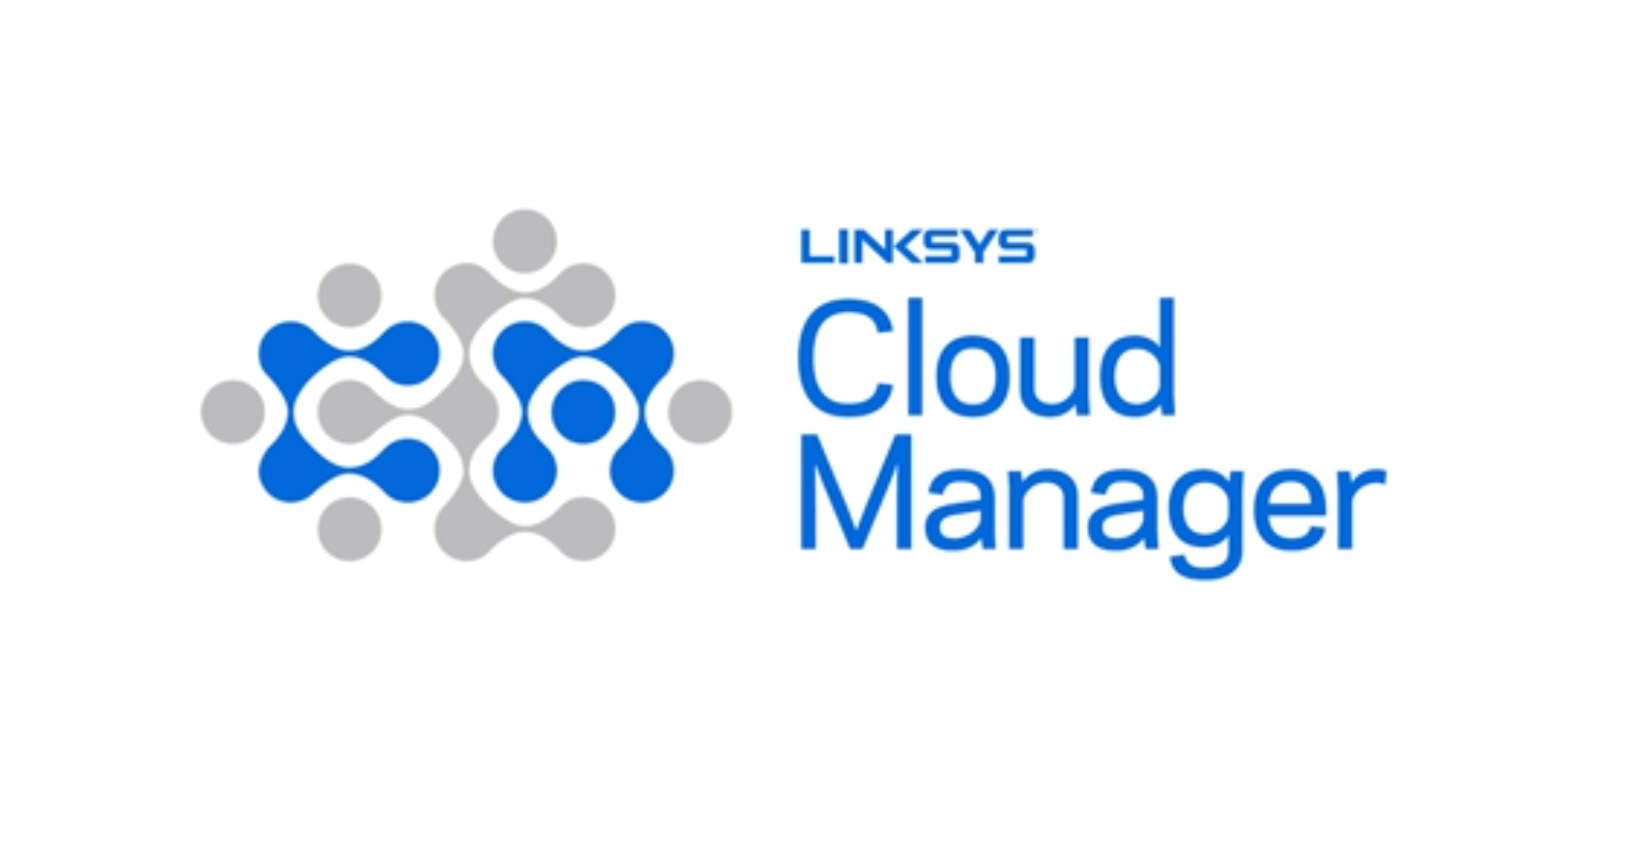 Linksys Launches High Performance, Enterprise-grade Cloud Networking Management For SMB Networks Without Licensing Fees